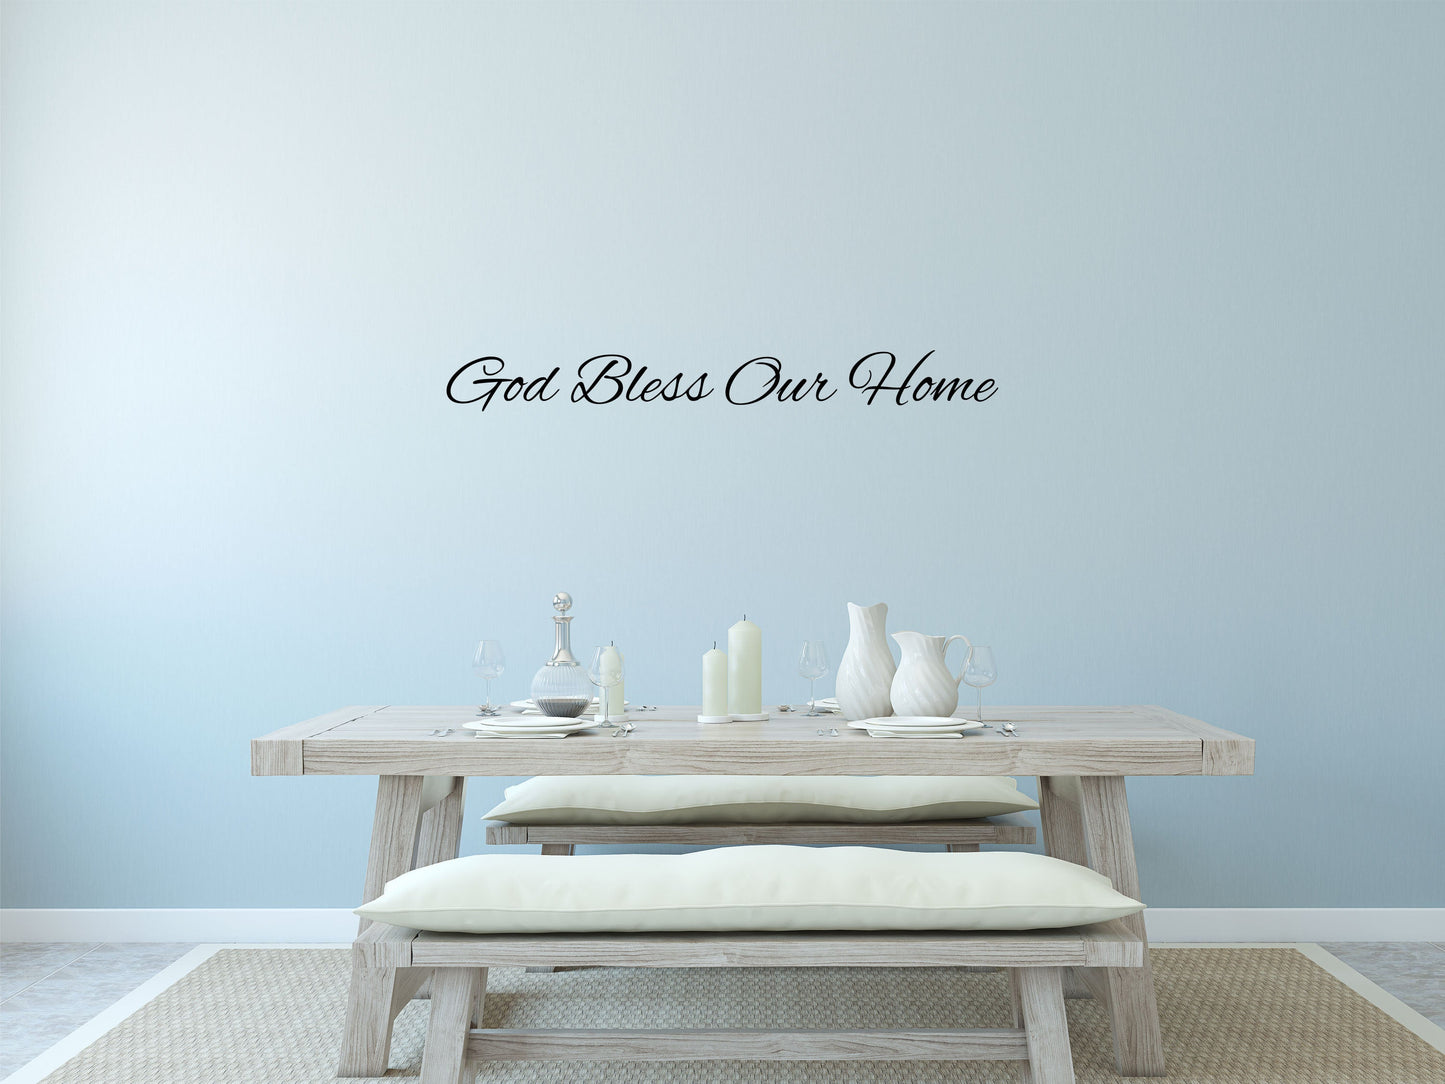 God Bless Our Home - Vinyl Wall Quote - Inspirational Wall Decals Vinyl Wall Decal Inspirational Wall Signs 